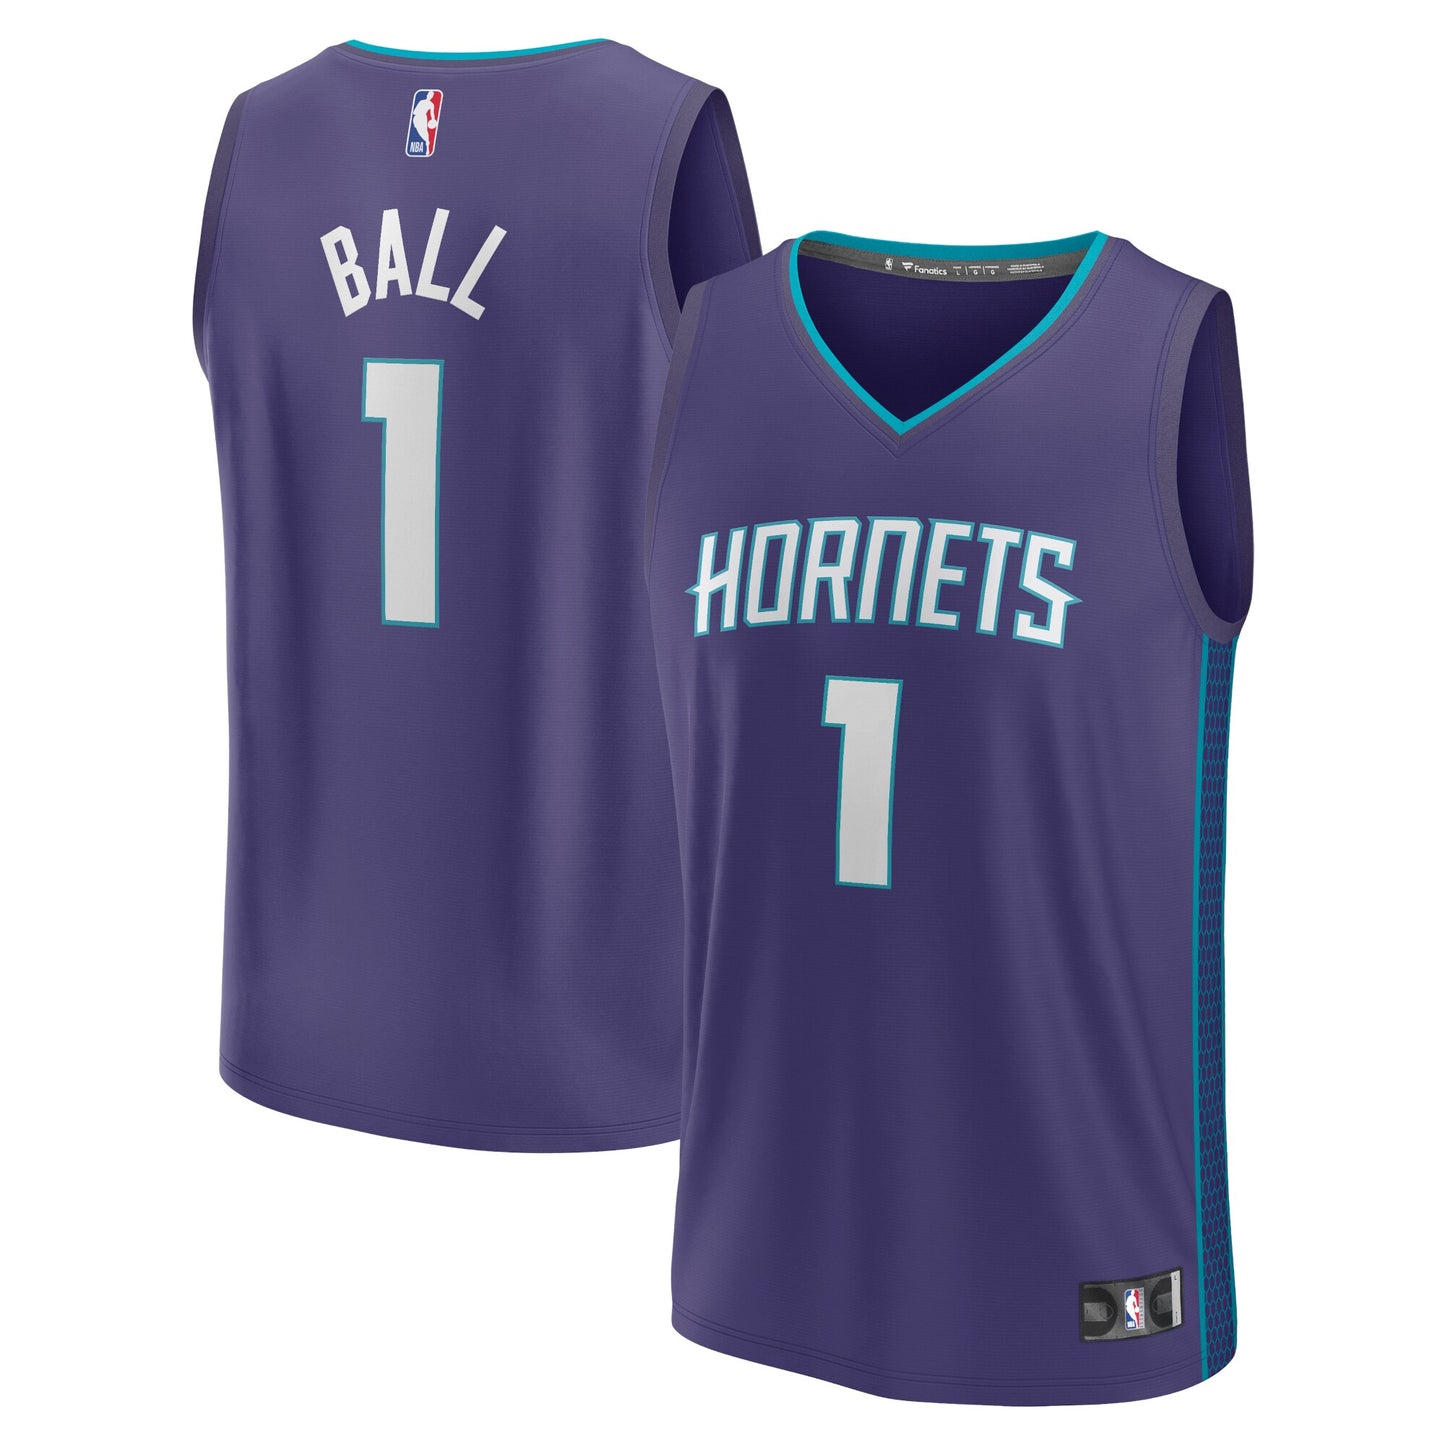 LaMelo Ball Charlotte Hornets Fanatics Branded Youth Player Jersey - Statement Edition - Purple